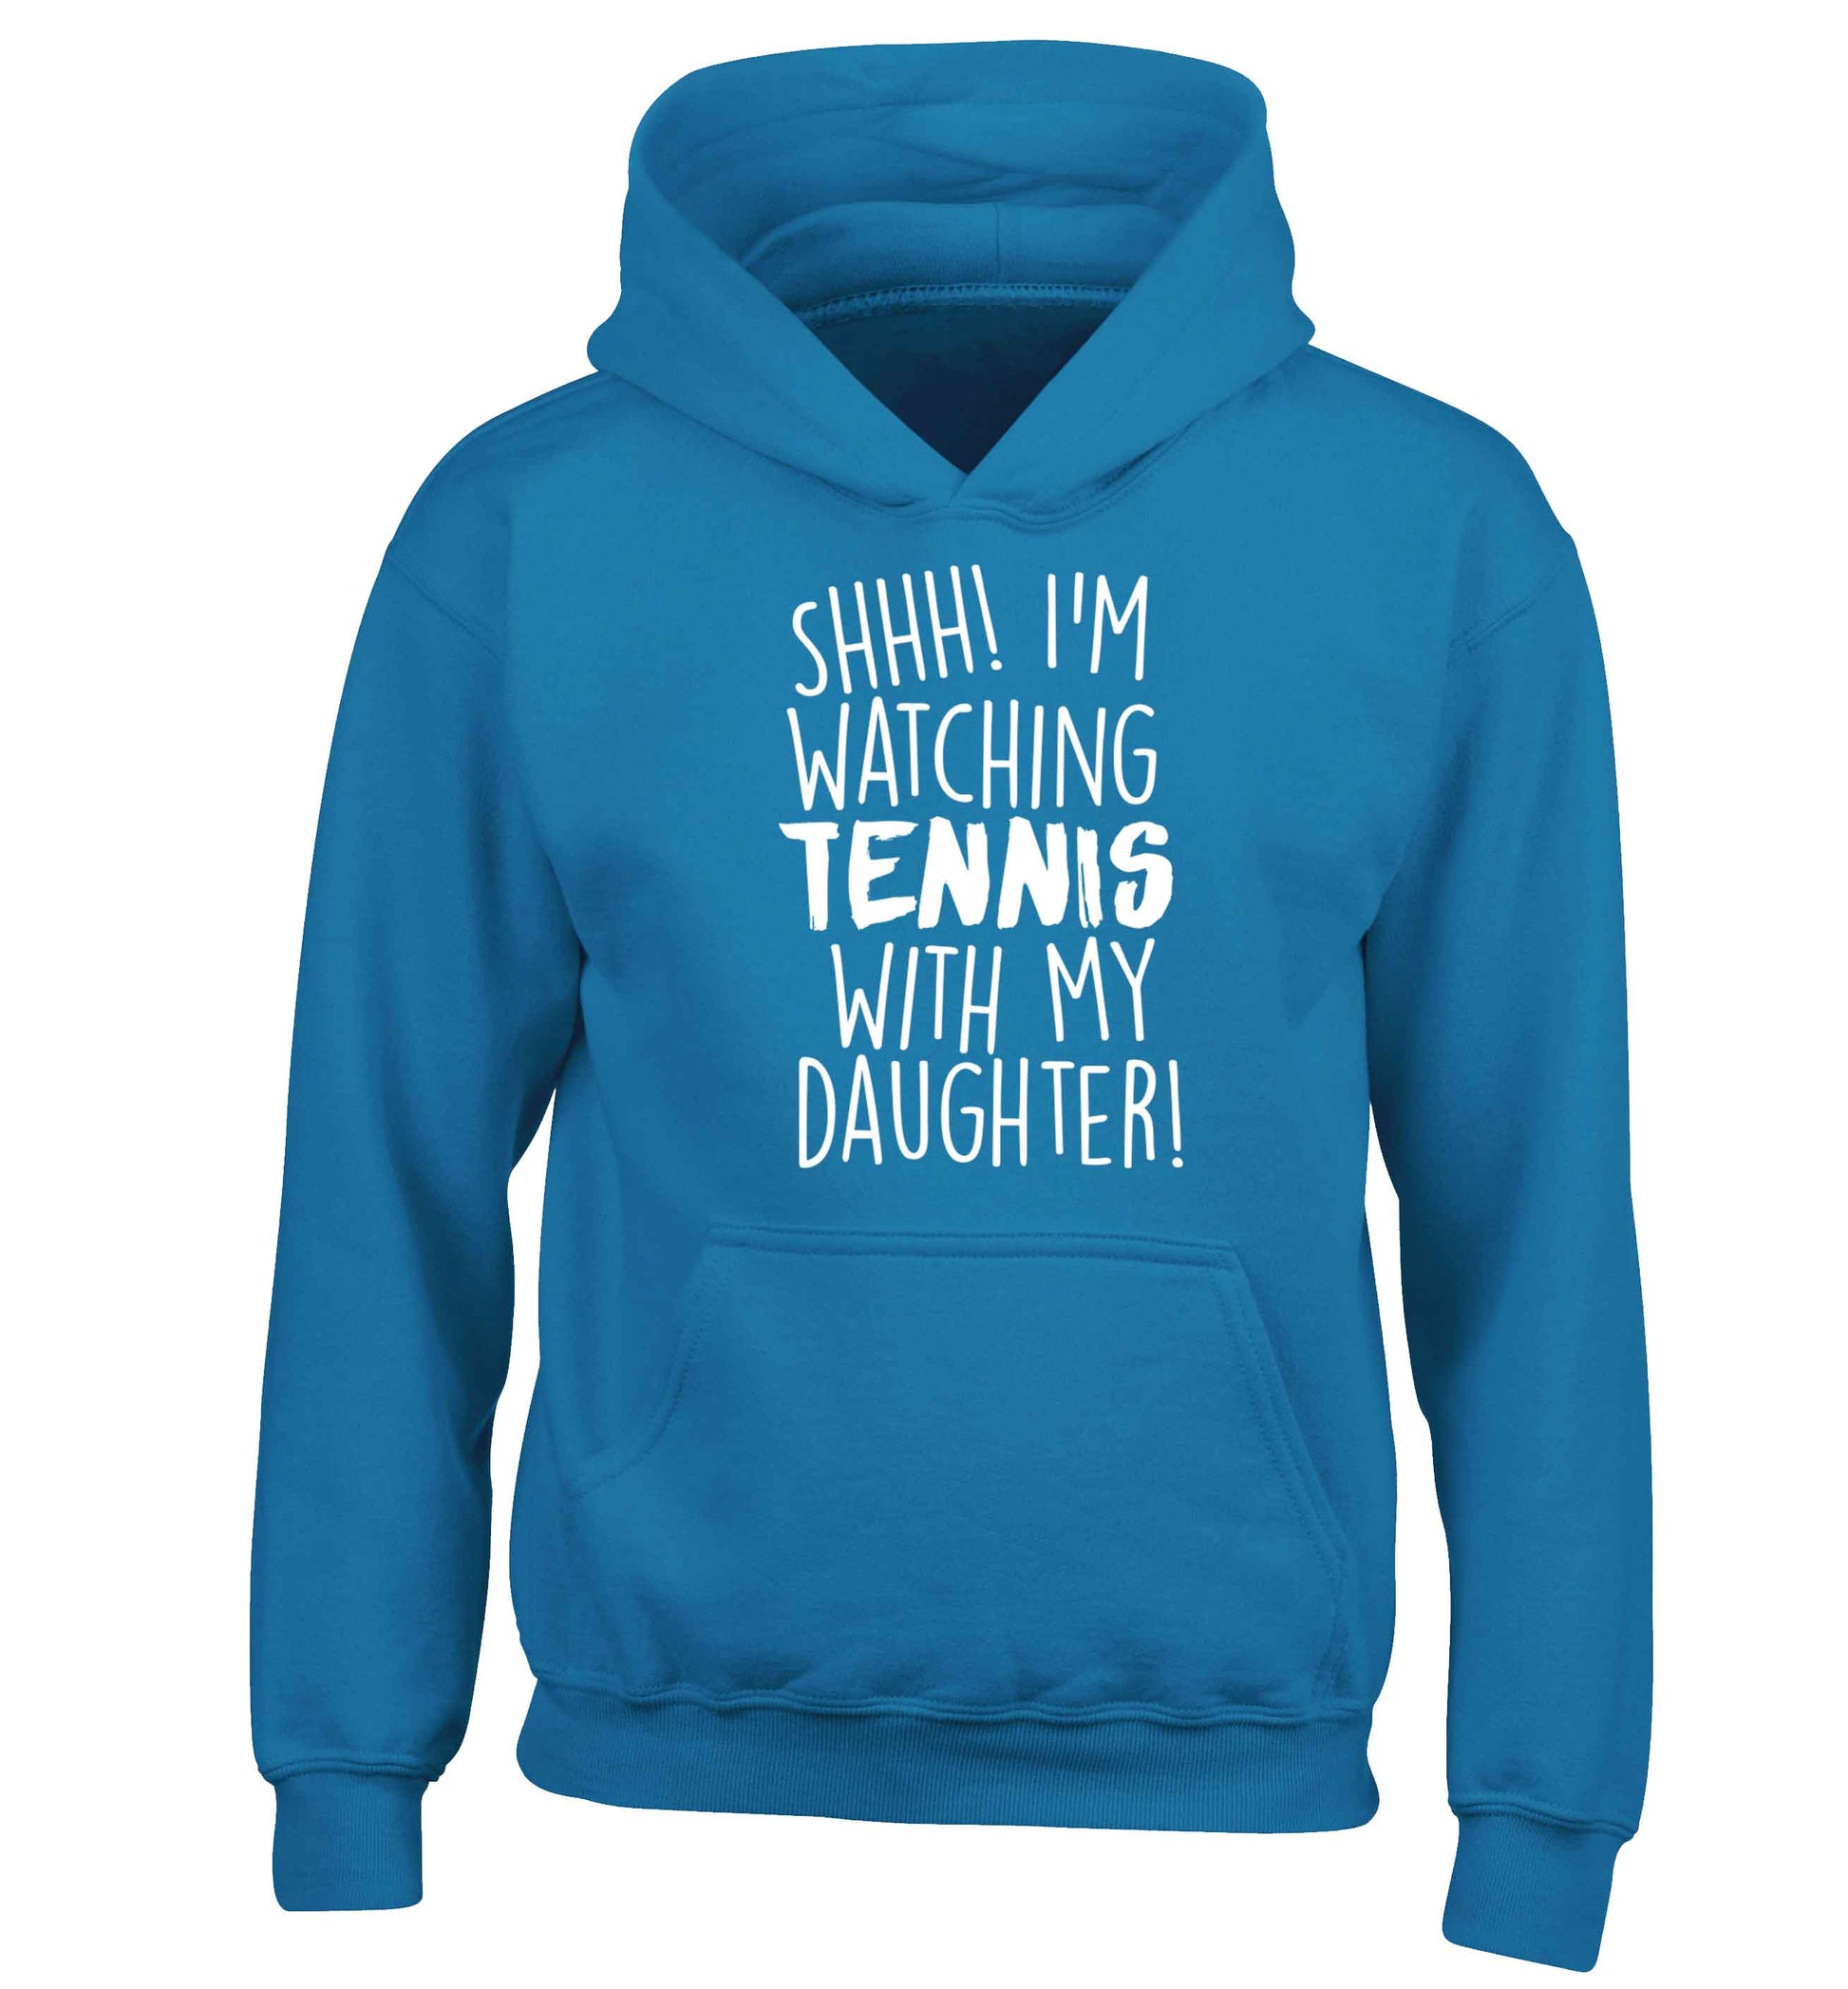 Shh! I'm watching tennis with my daughter! children's blue hoodie 12-13 Years